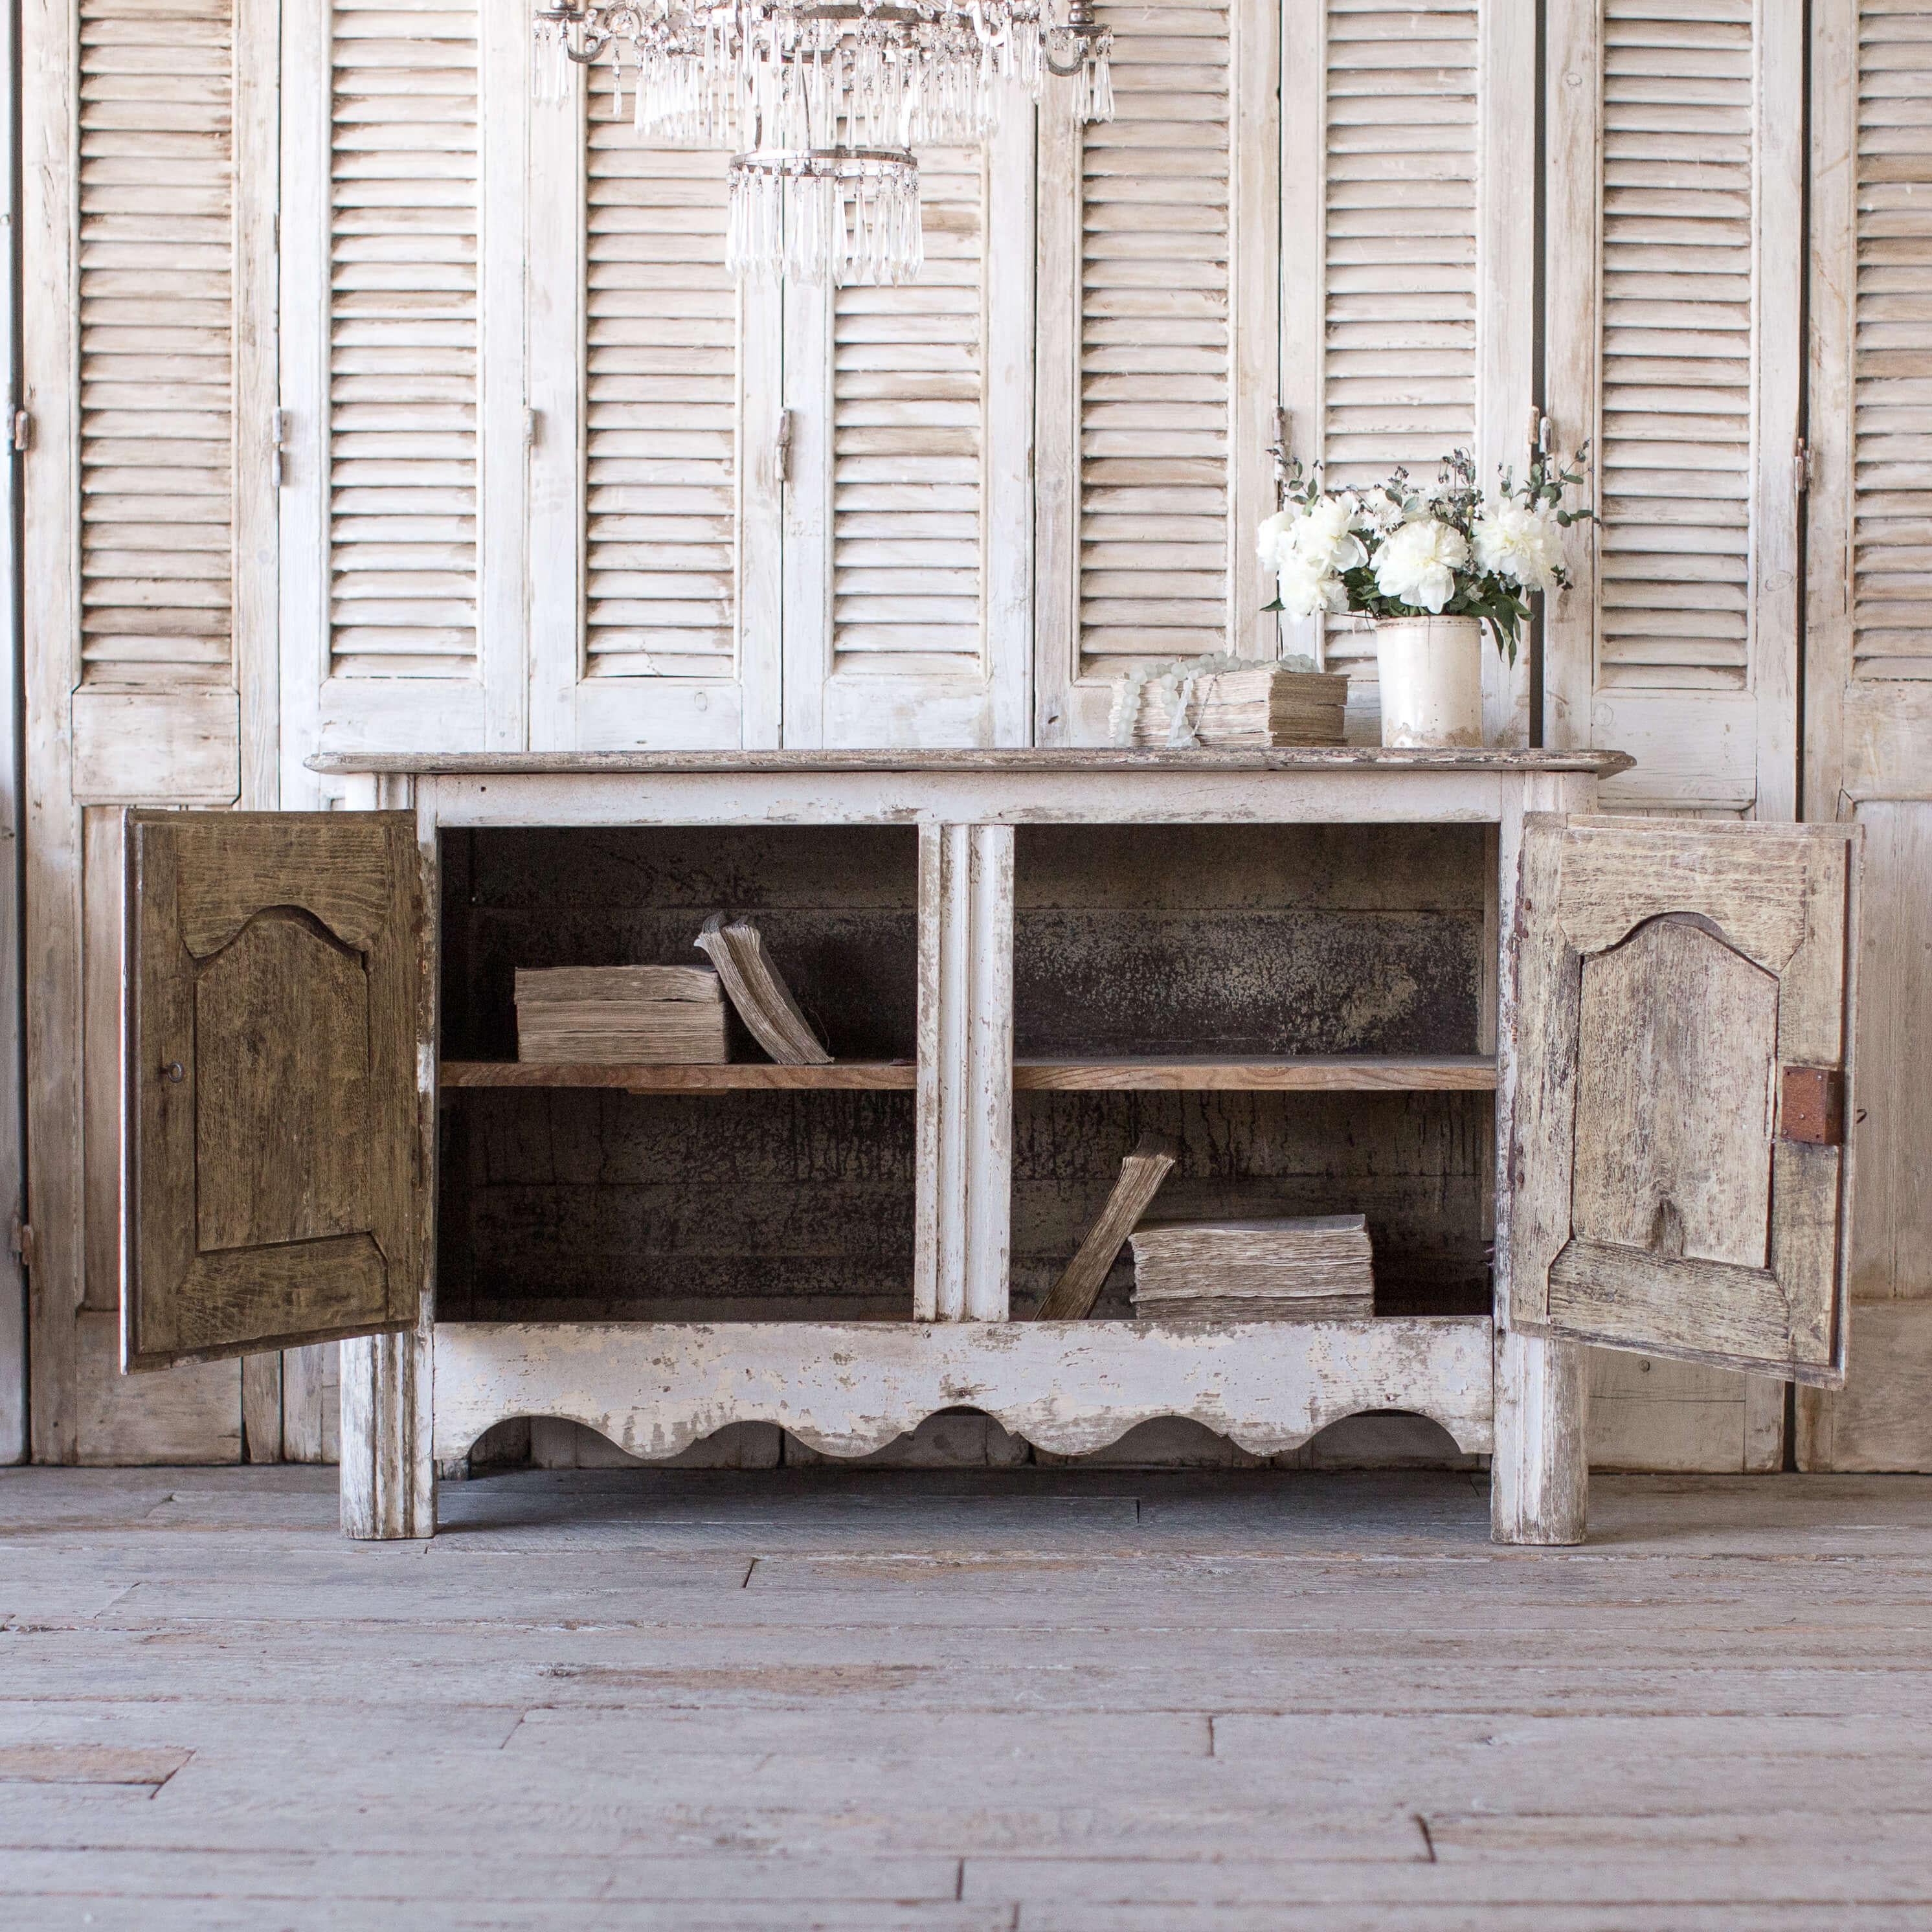 Gorgeous two-door cabinet from the southwest of France. This piece has amazing old hardware and unusual Quatrefoil carving on doors as well as beautiful scrolling base details. A true stand out piece.